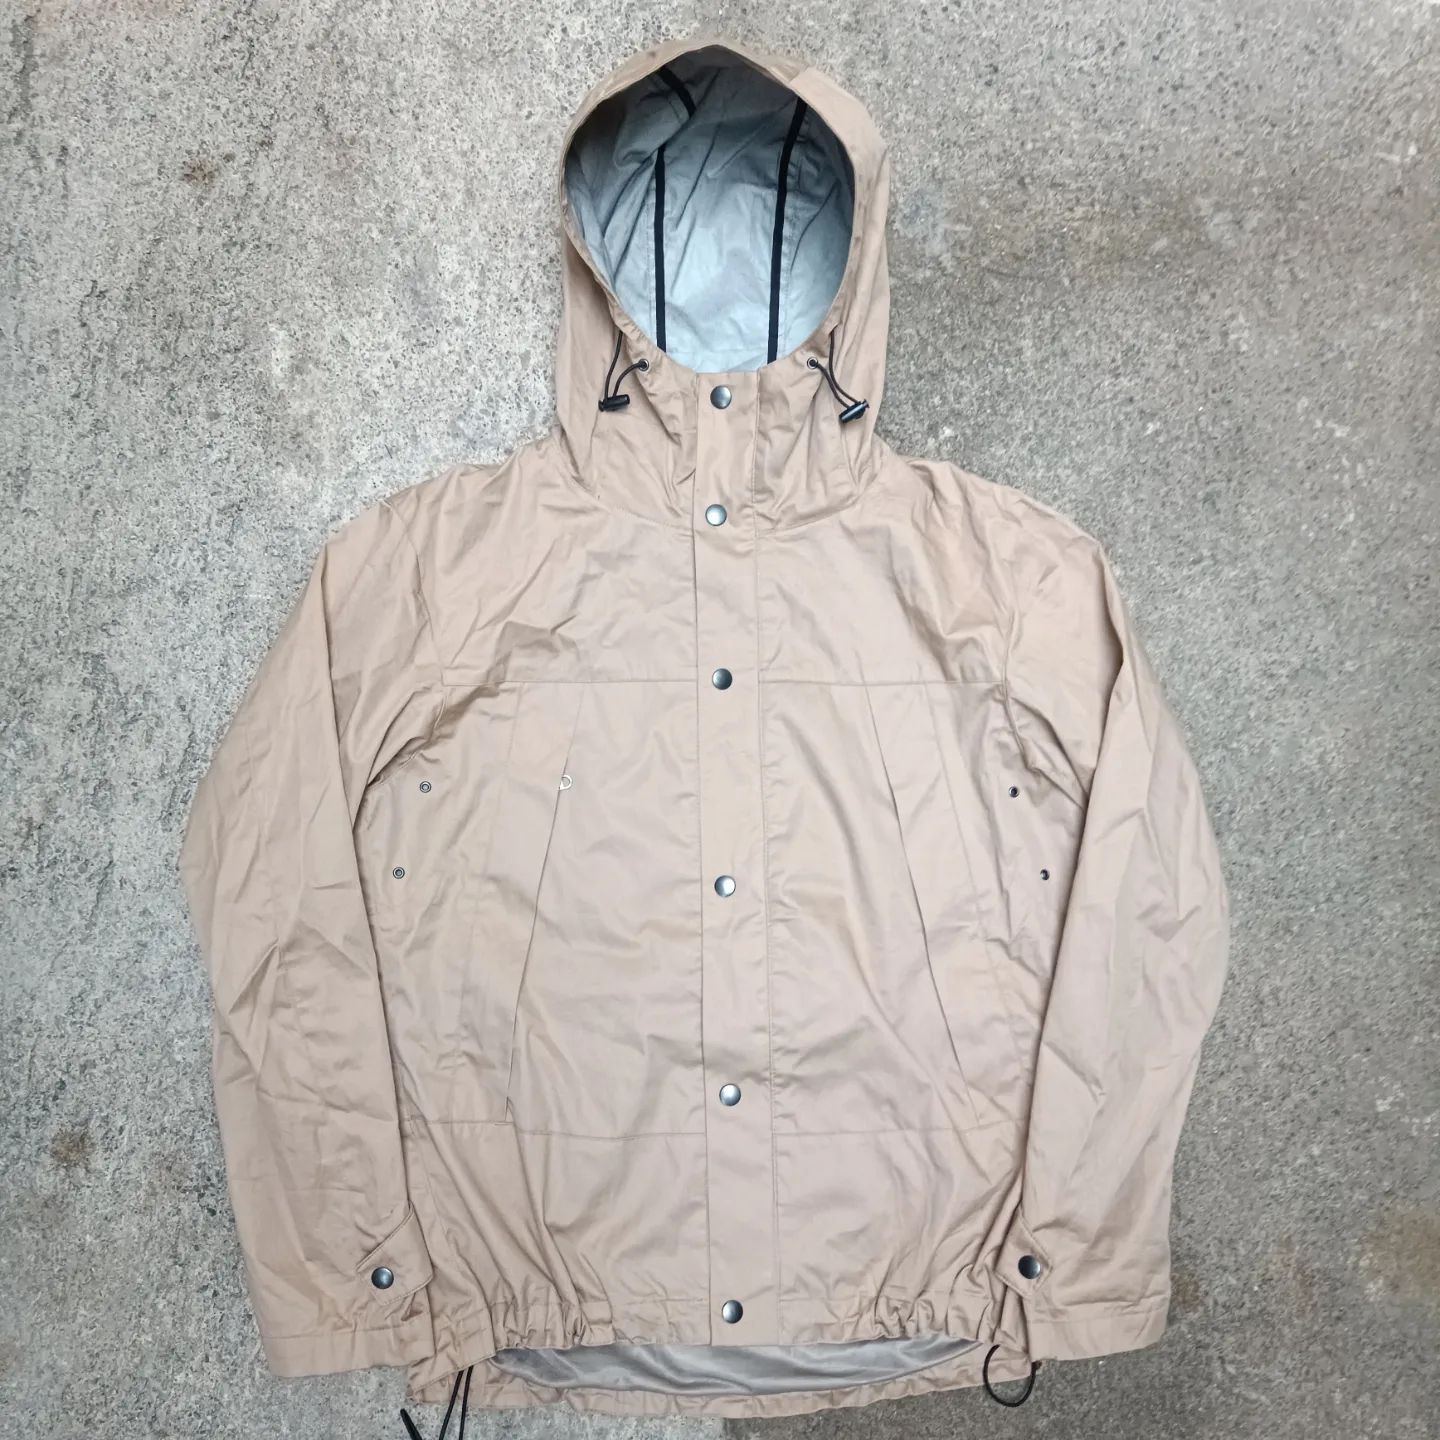 Outdoor Style Go Out! Muji mountain parka | Grailed